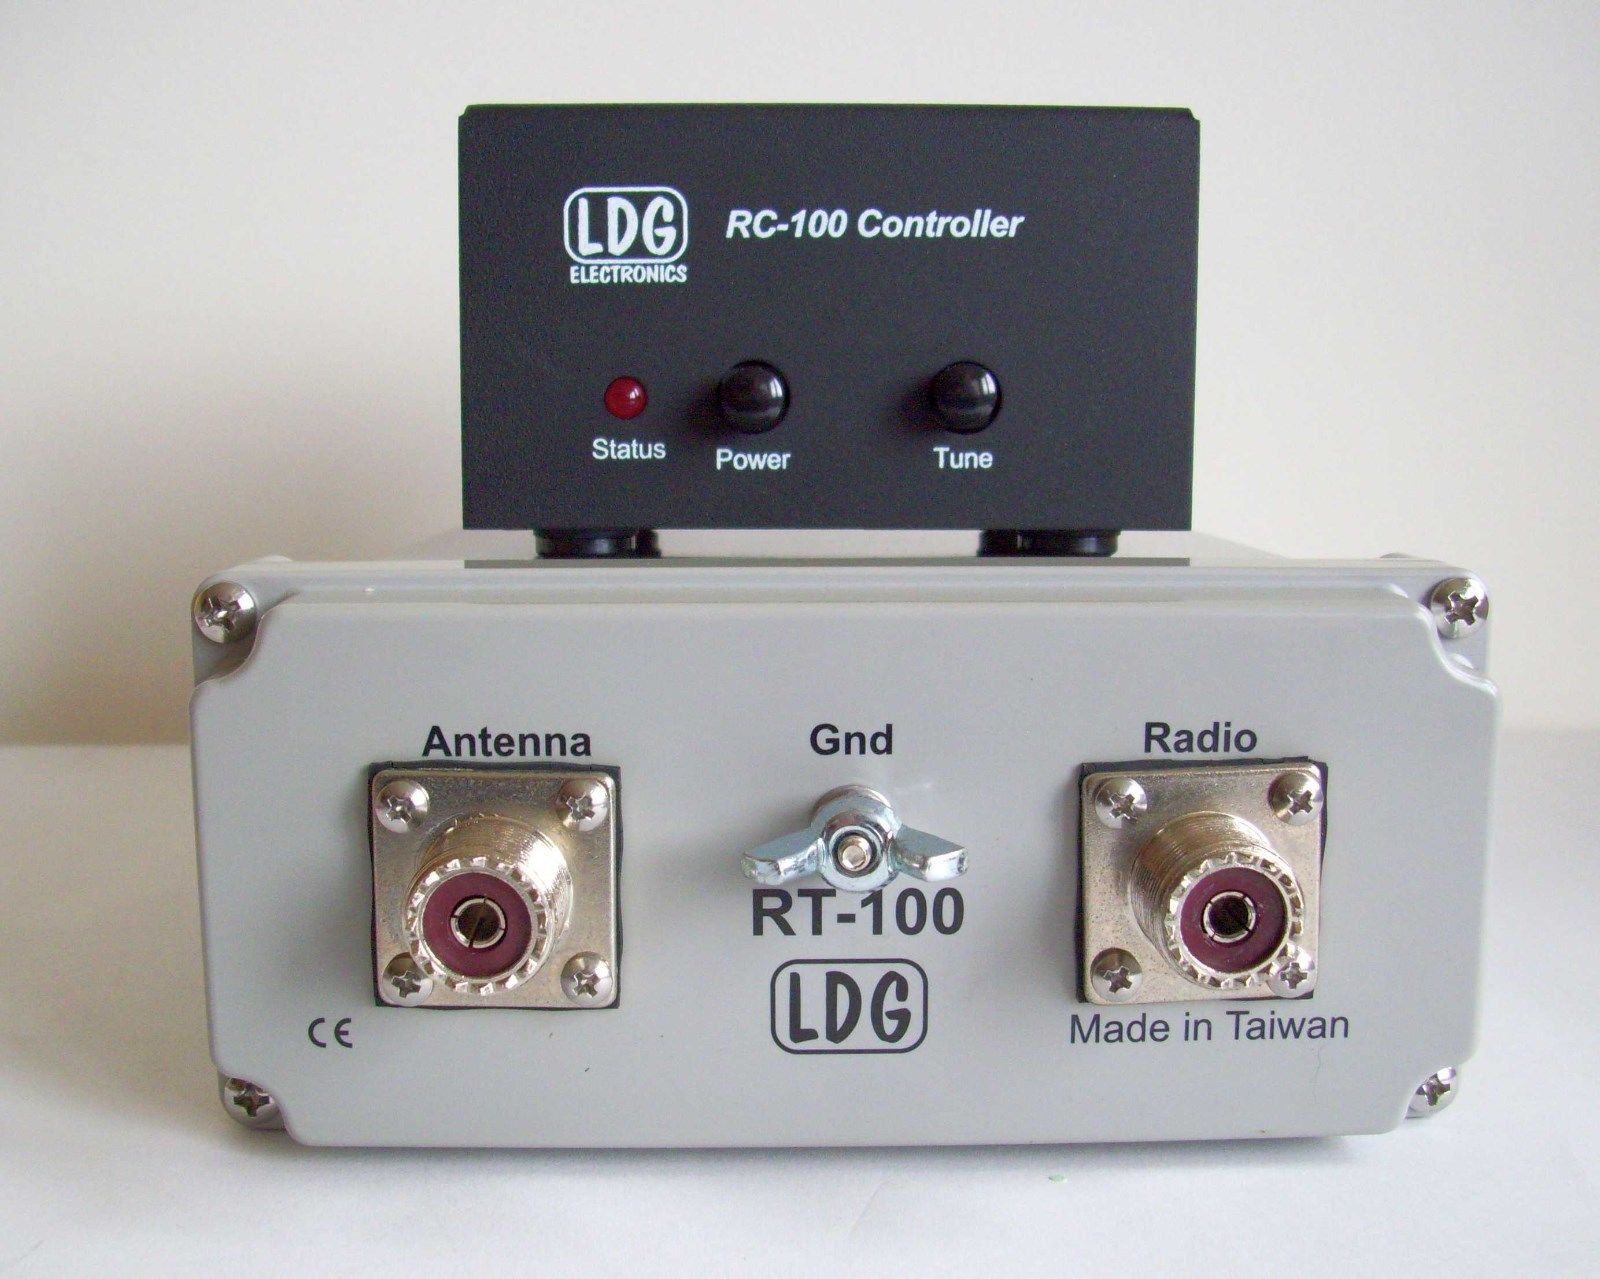 The LDG RT-100 is an automatic tuner intended for outdoor mounting